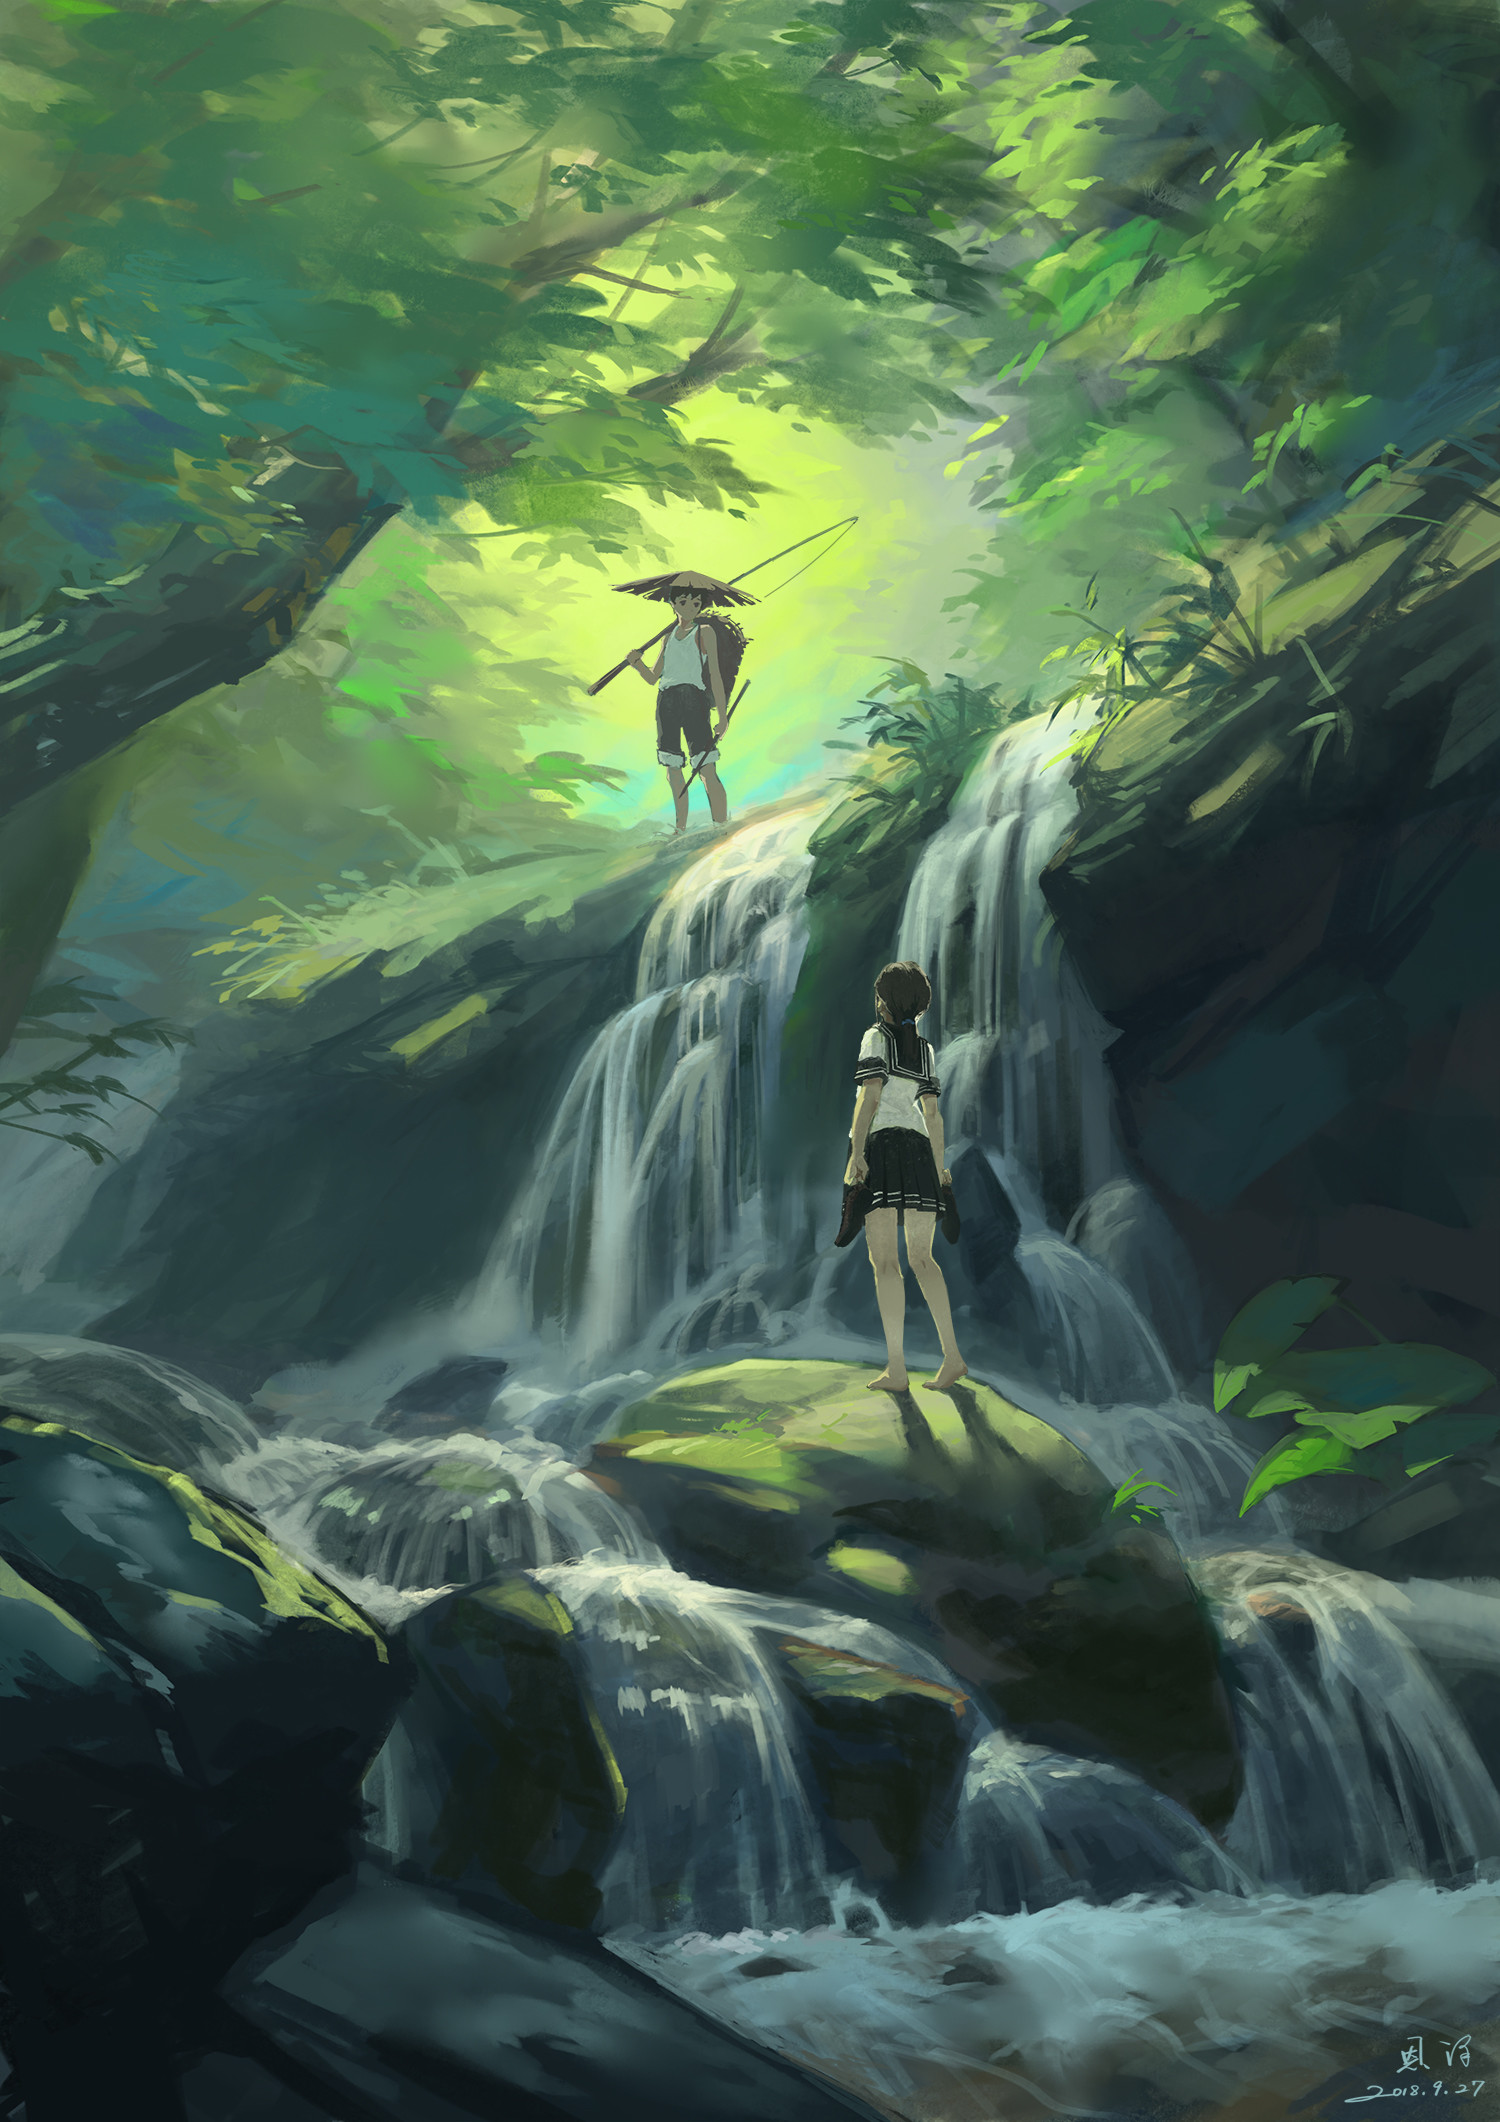 girl, guy, jungle, art, forest, waterfall High Definition image